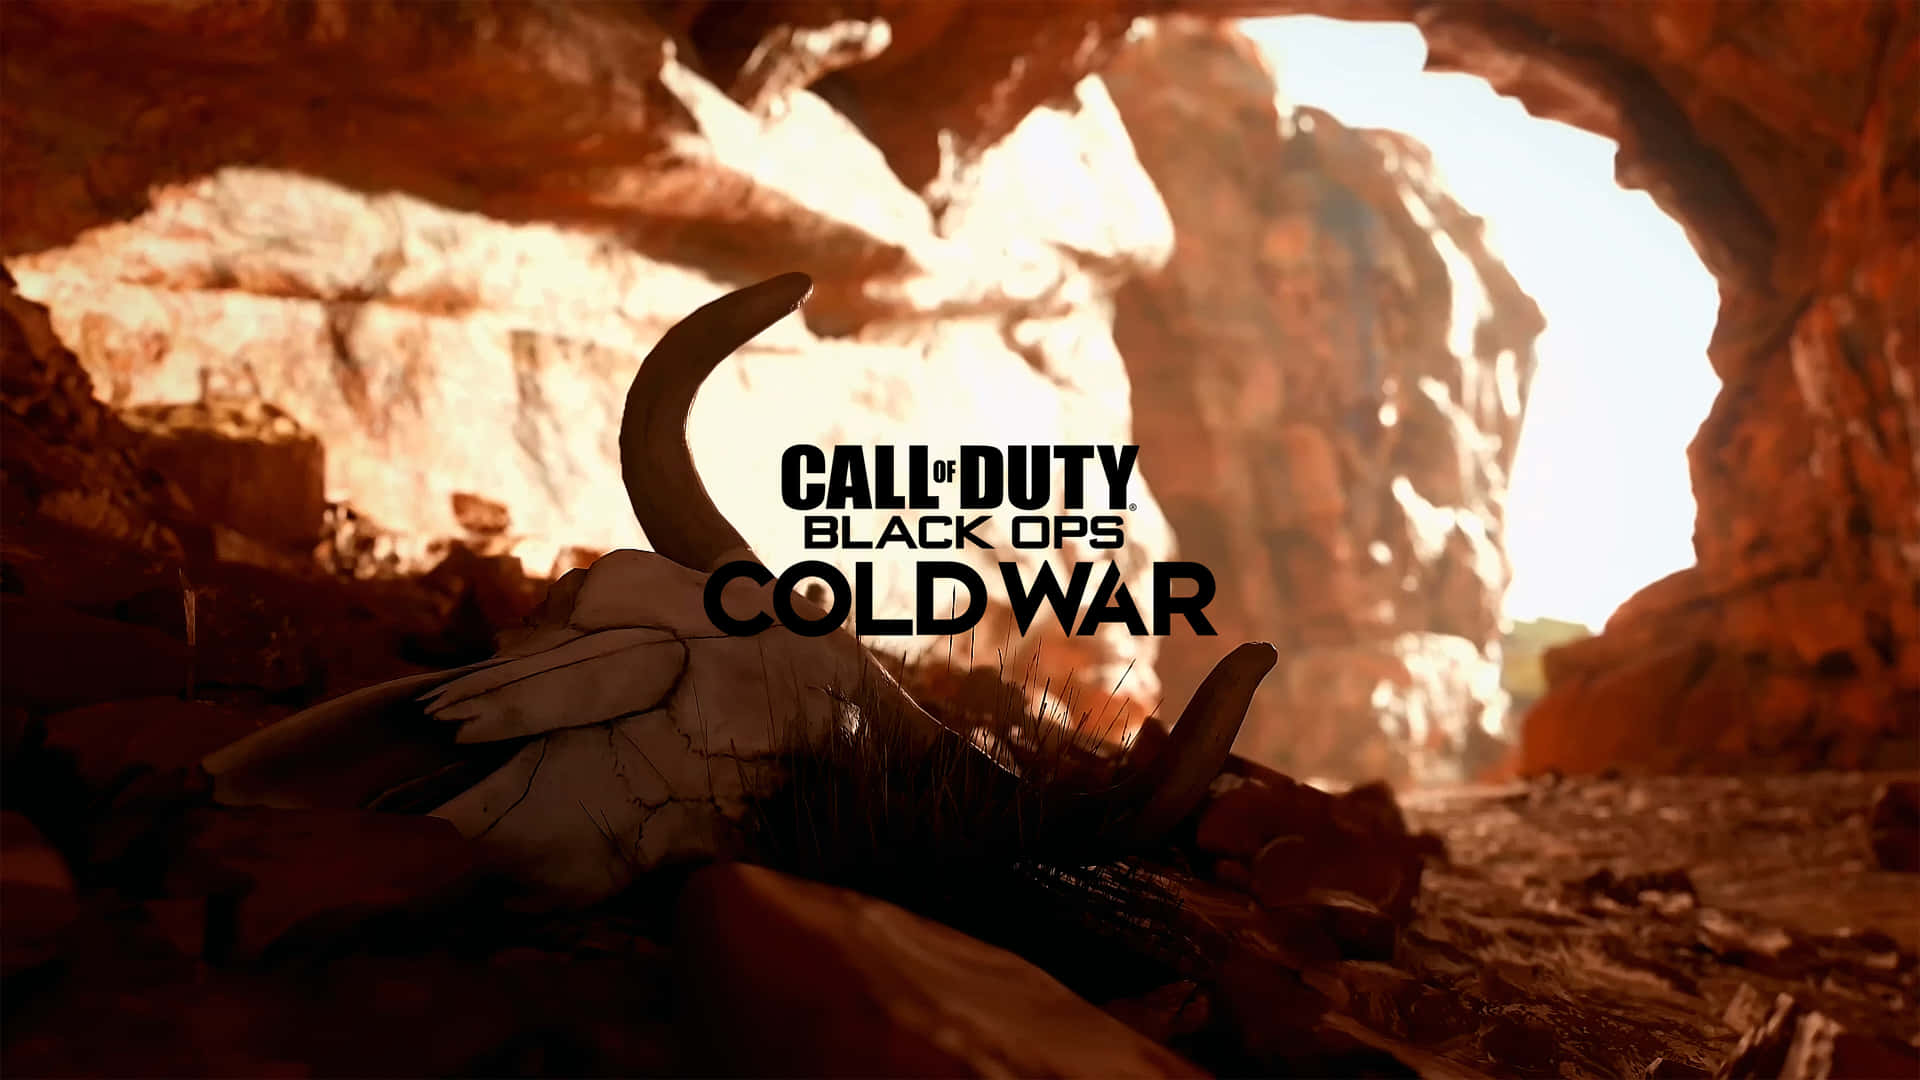 Get ready for explosive action in Call of Duty Black Ops Cold War